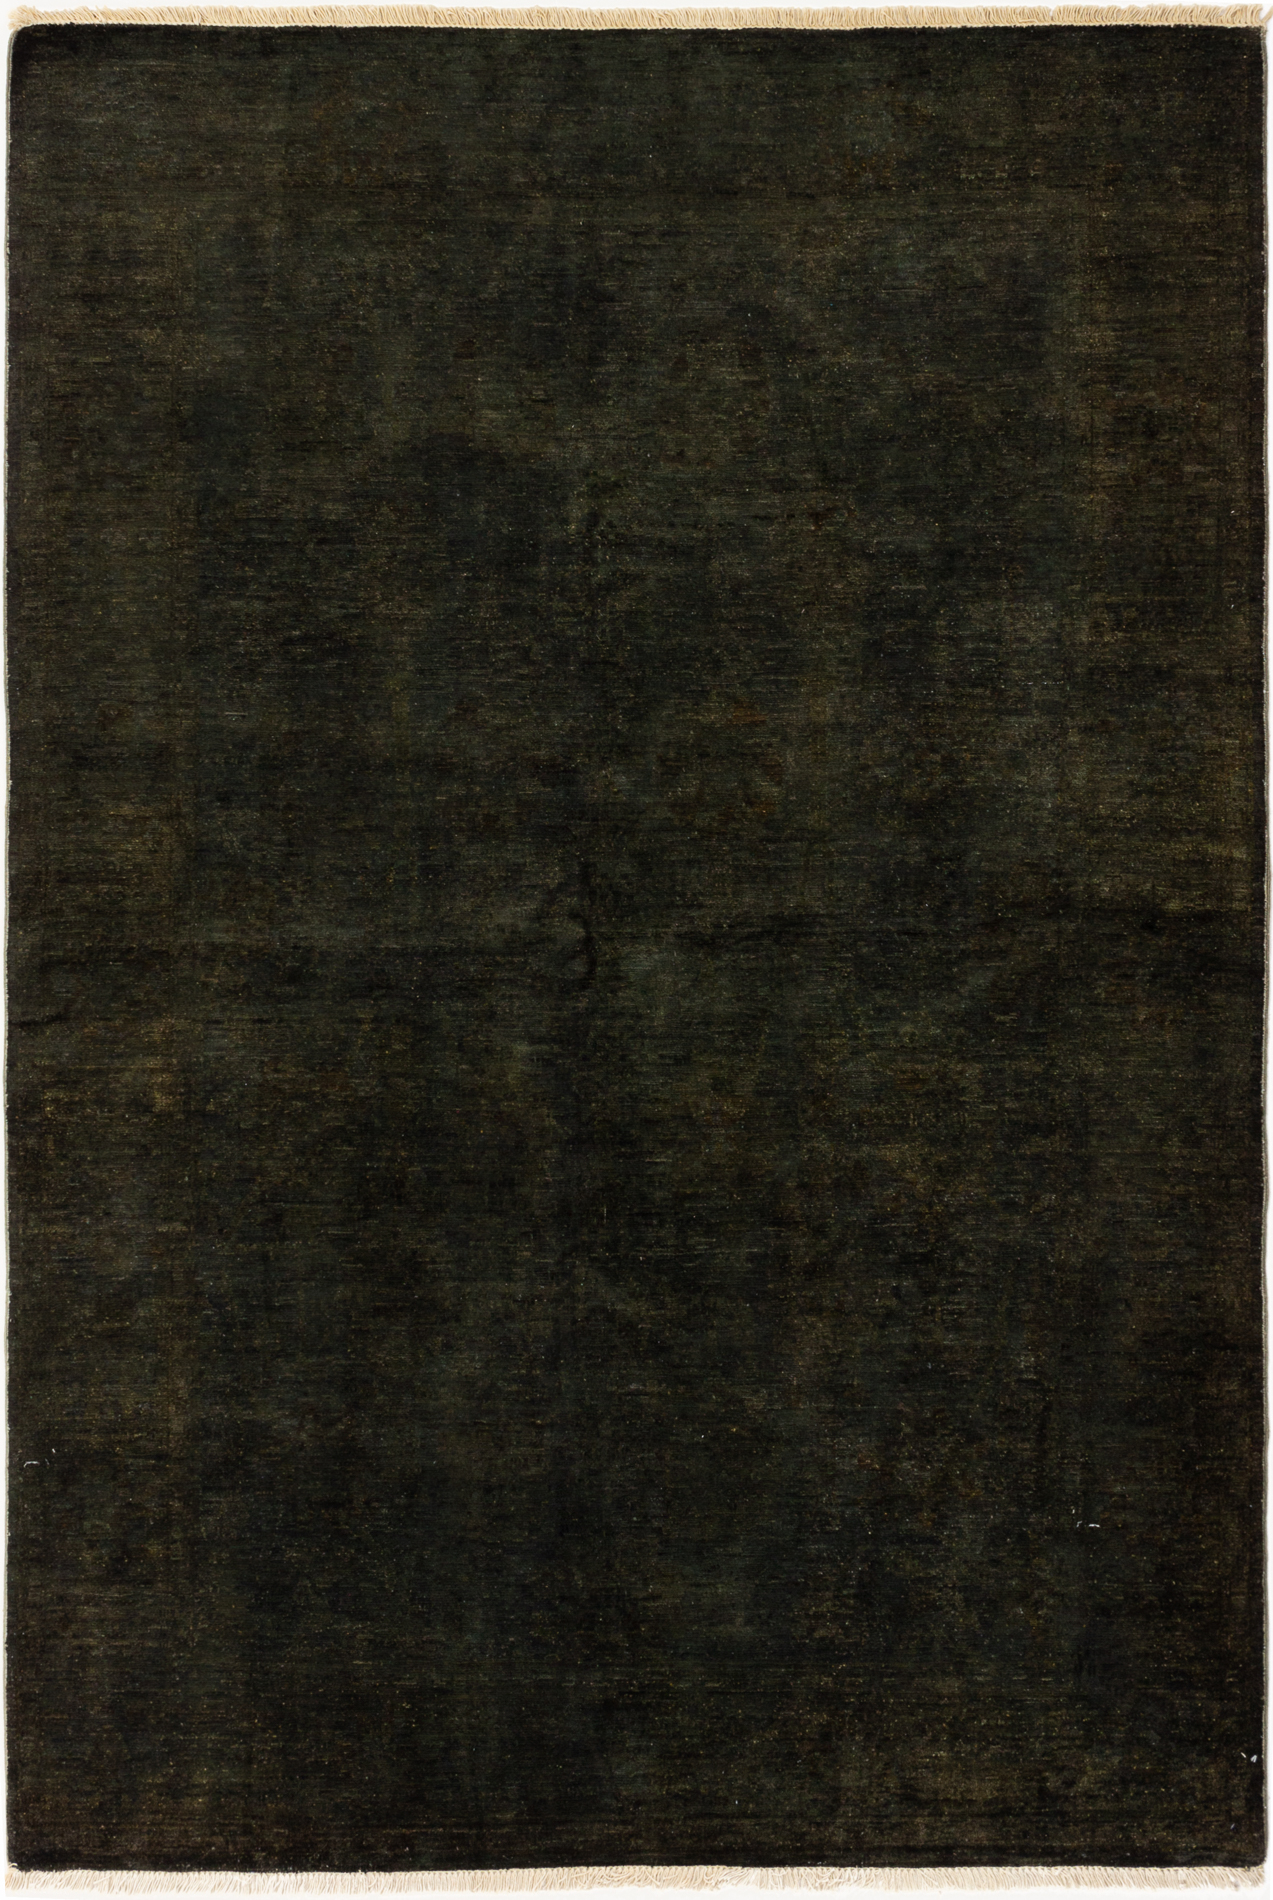 Hand-knotted Color transition Dark Brown Wool Rug 6'0" x 8'9" Size: 6'0" x 8'9"  